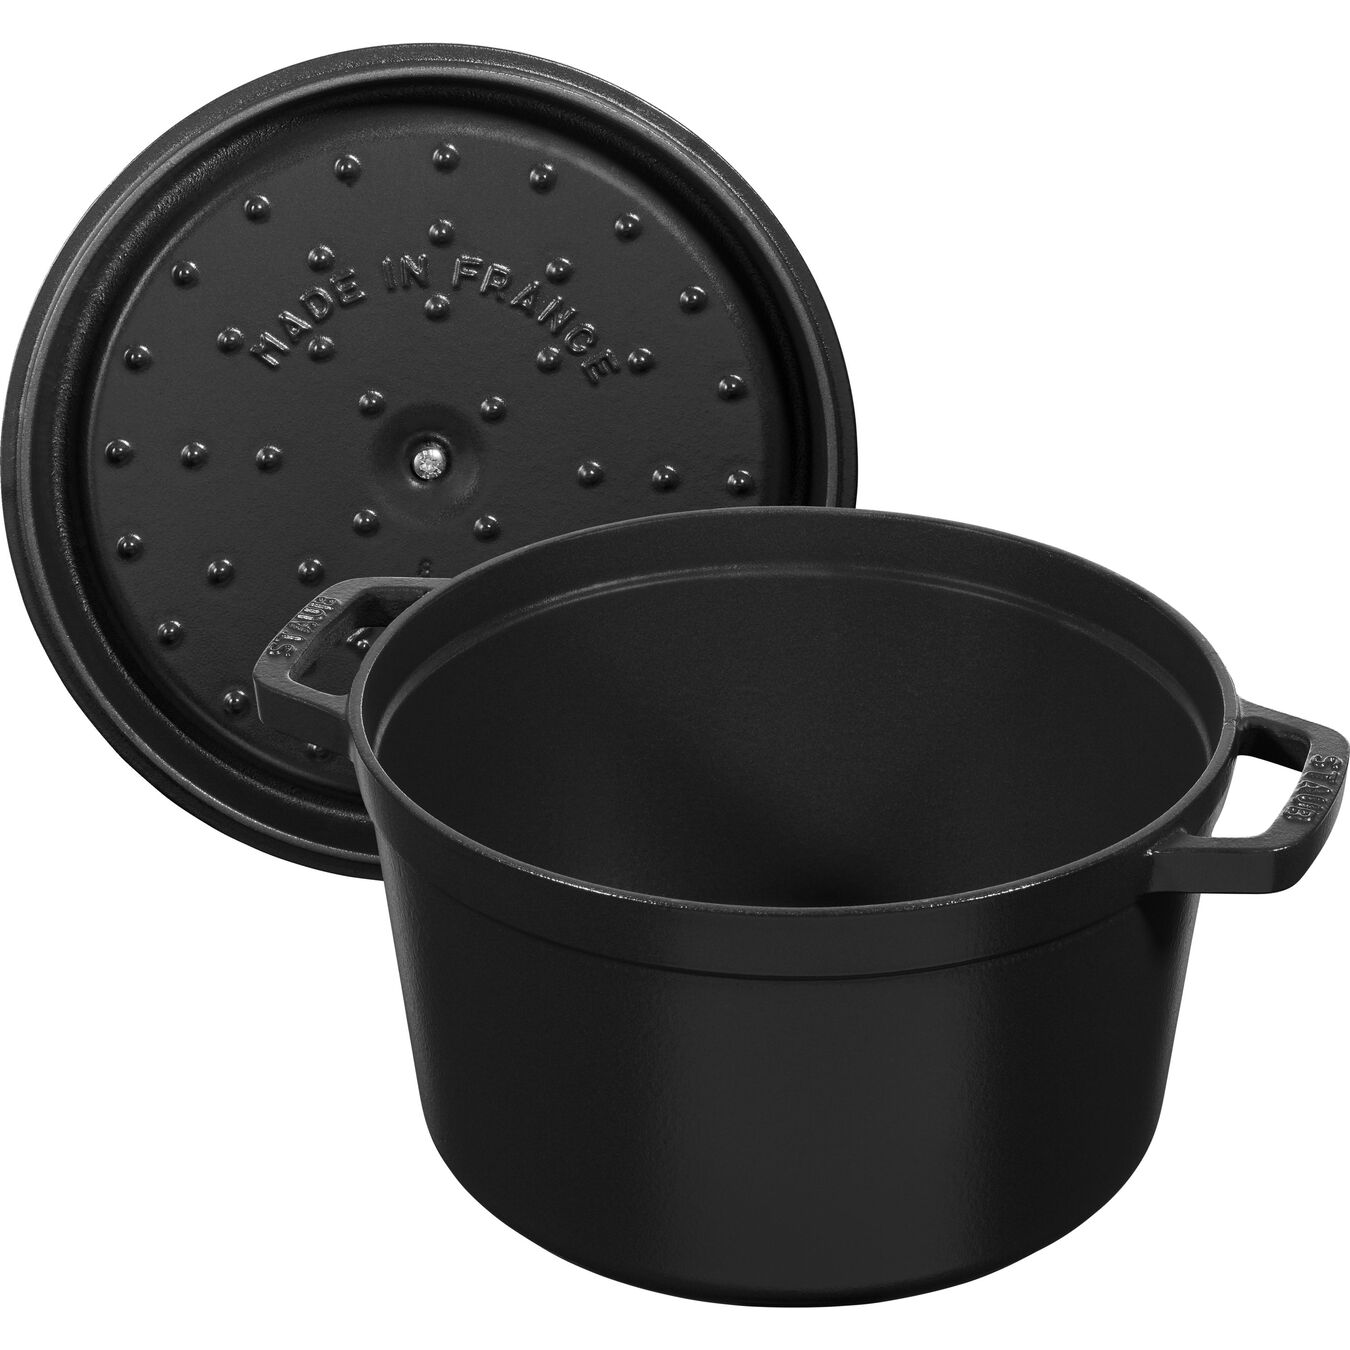 4.75 l cast iron round Tall cocotte, black - Visual Imperfections,,large 5